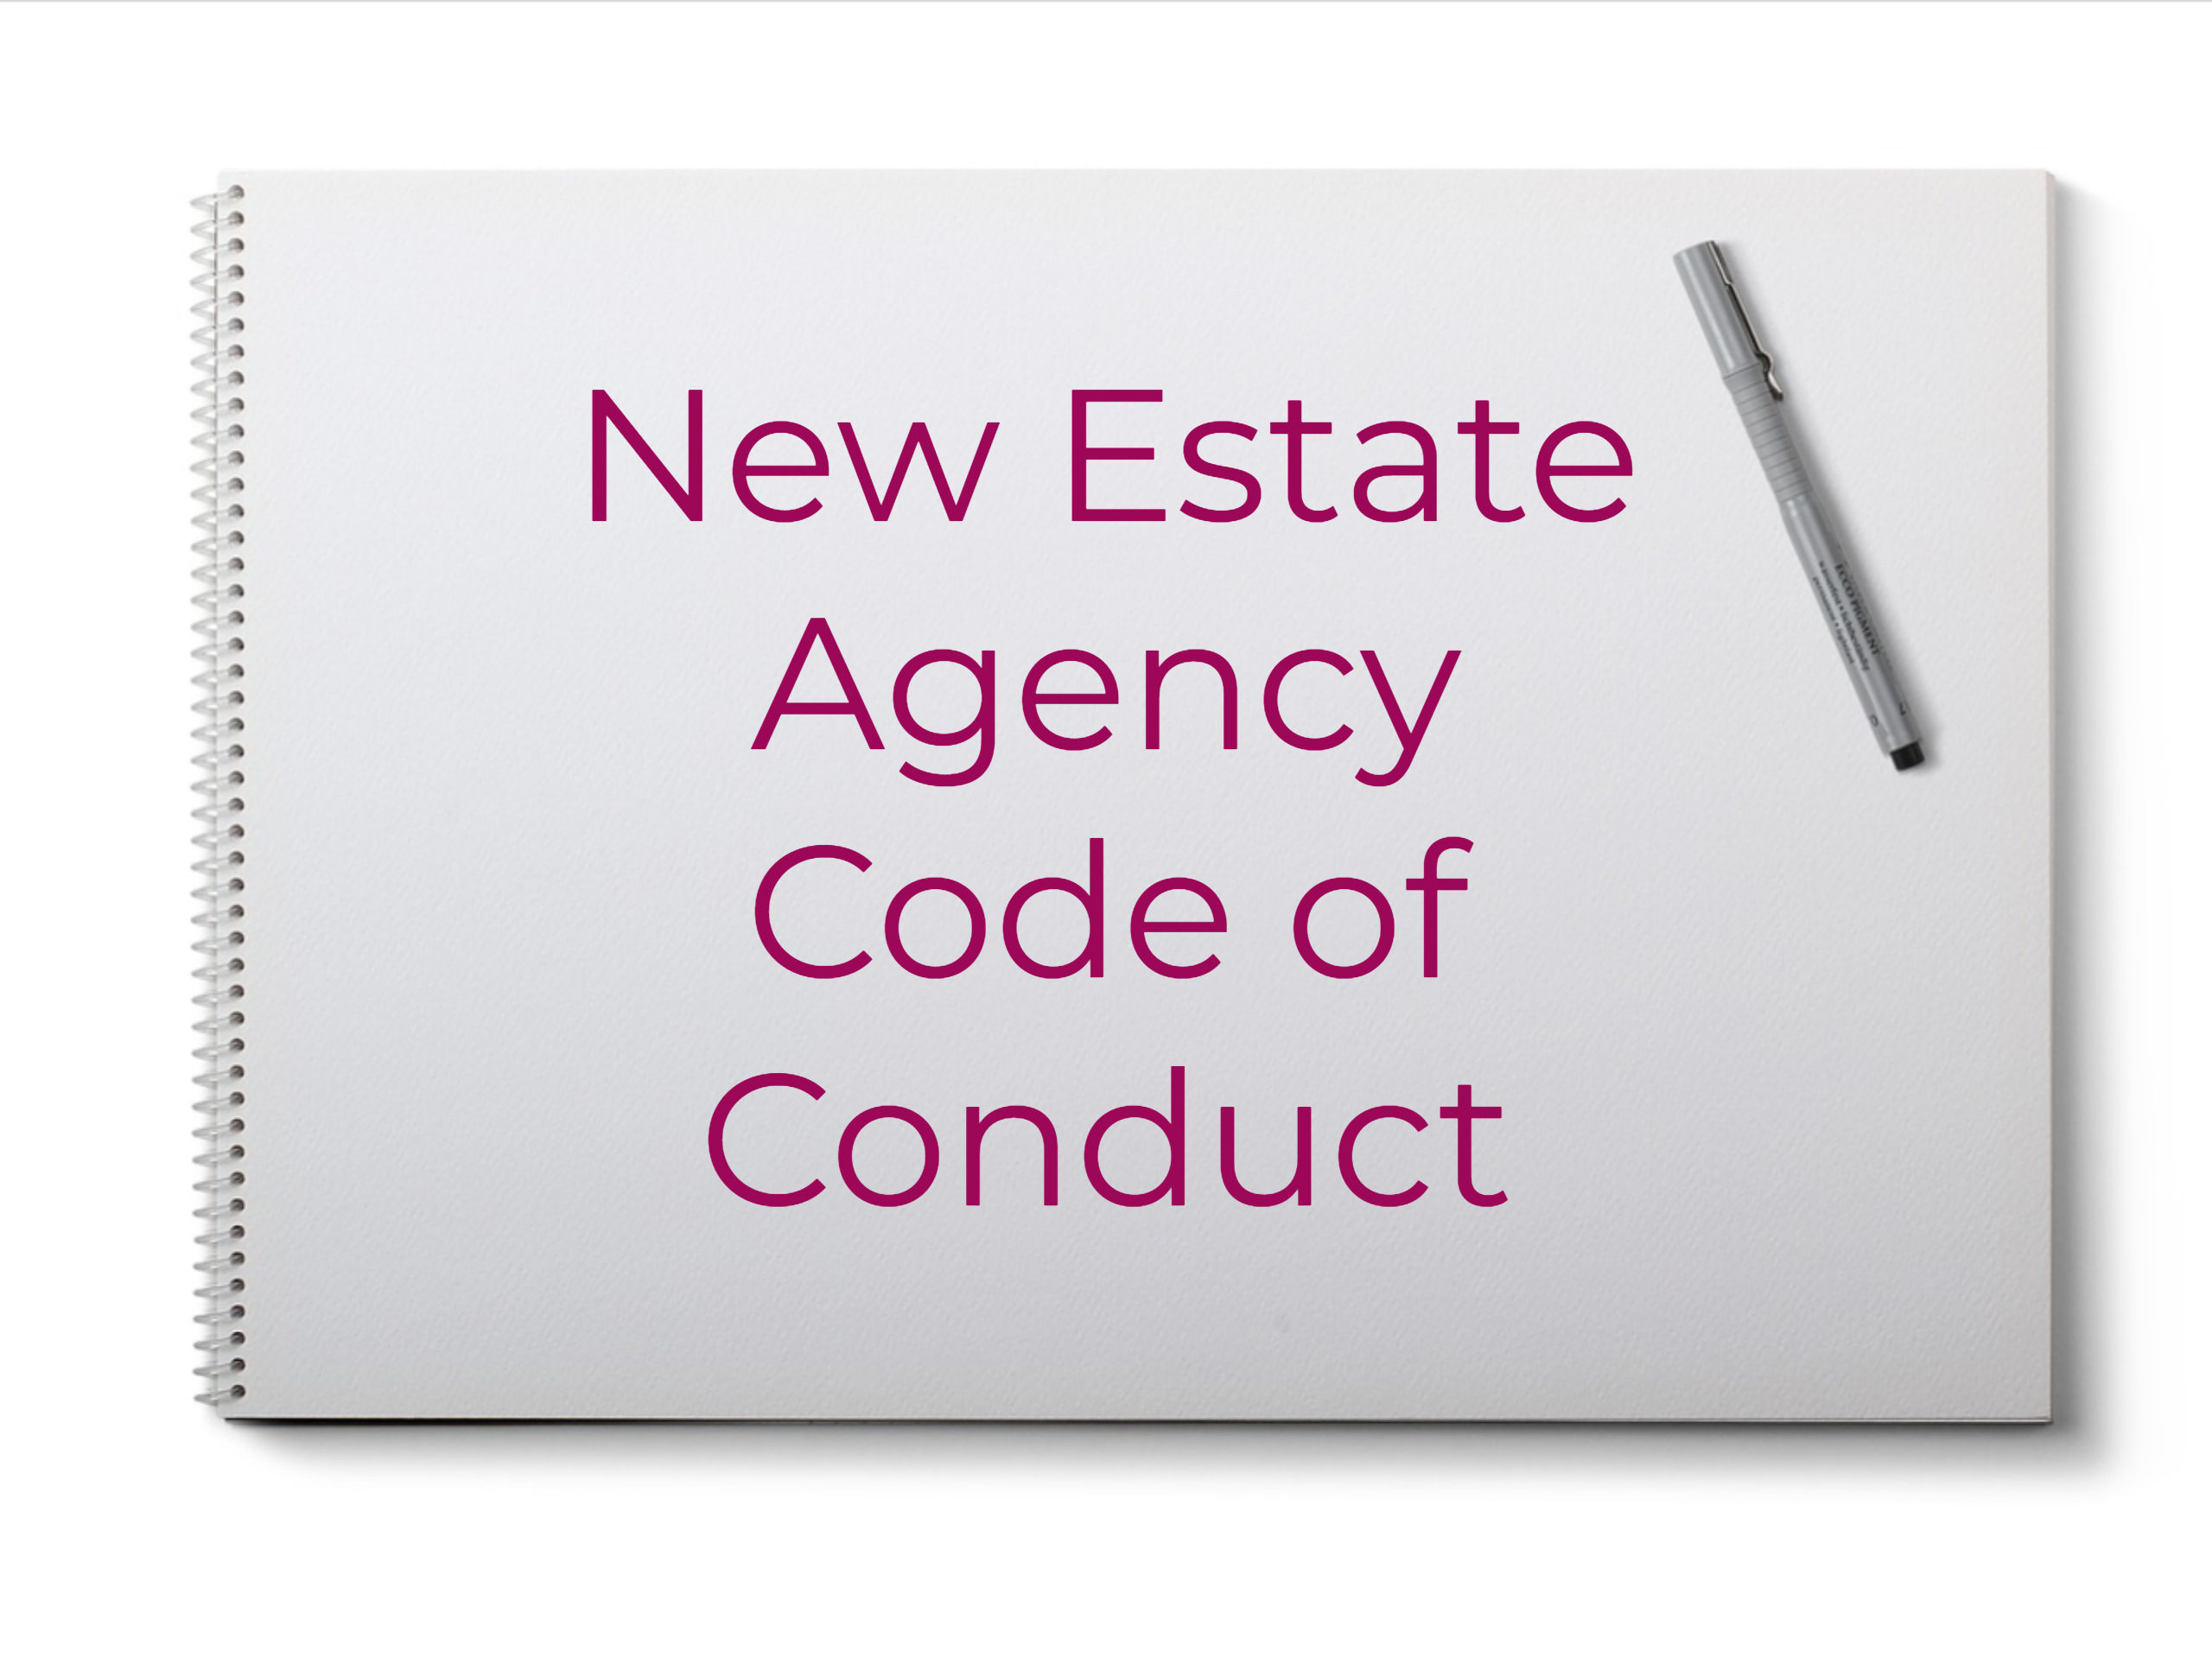 New Estate Agent Code of Conduct released Image